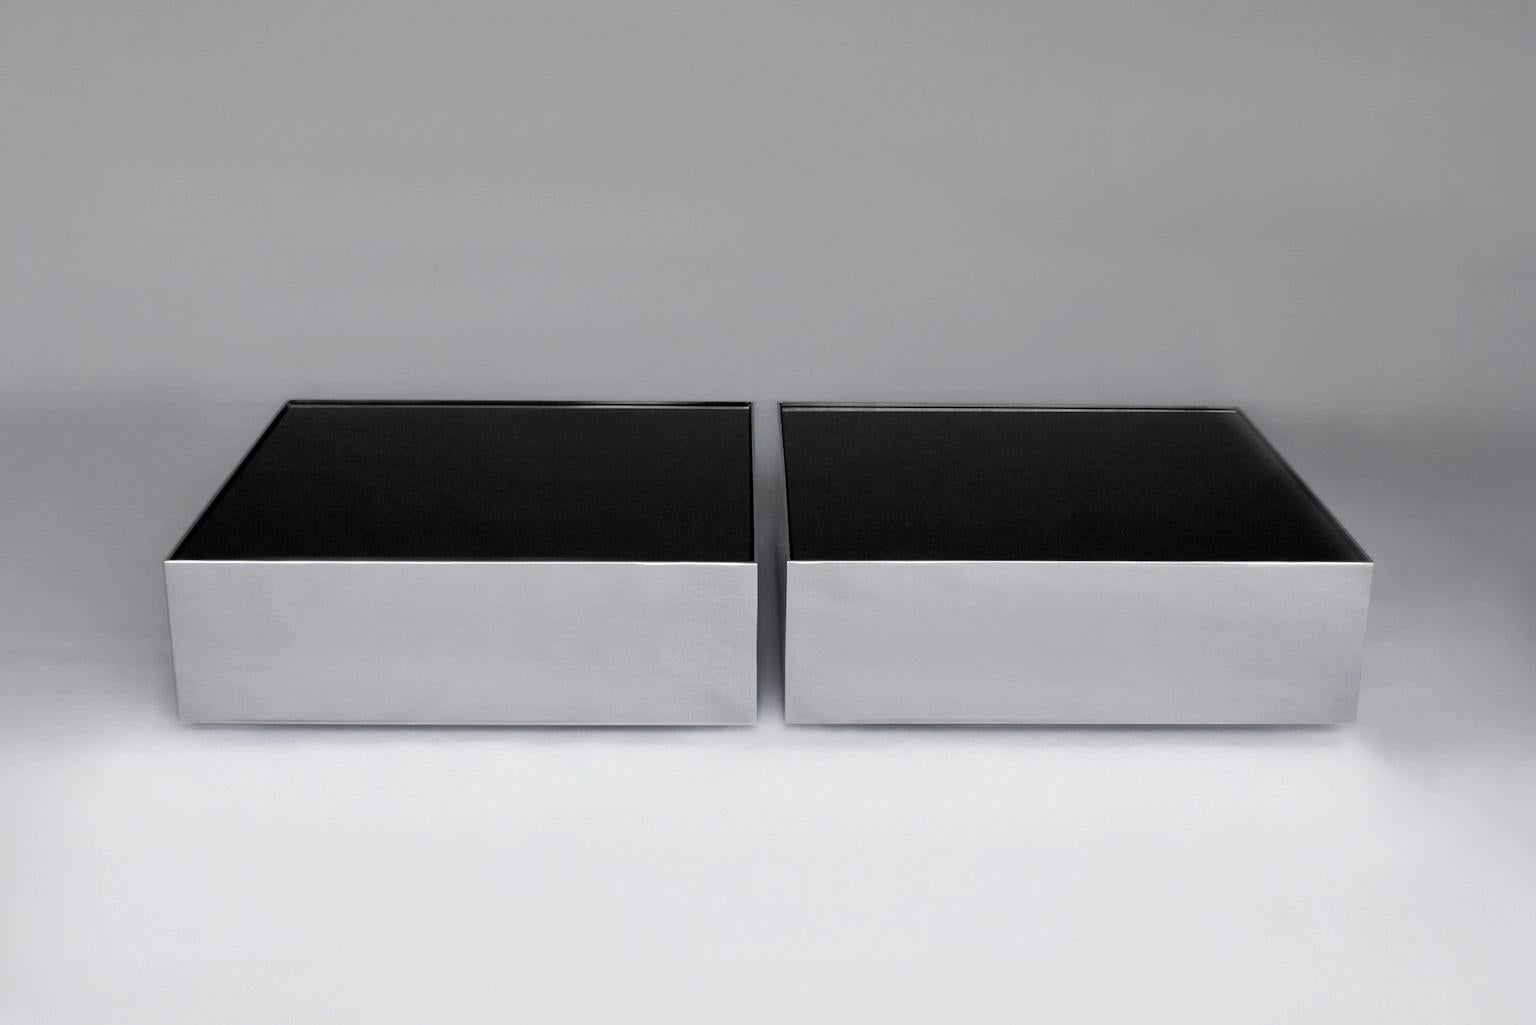 Set Of 2 Black Ice Coffee Tables by Phase Design
Dimensions: D 76,2 x W 76,2 x H 25,4 cm.
Materials: Spandrel glass and polished chrome metal.

Steel coffee table with spandrel glass top. Available in polished chrome or powder coat finish. Prices